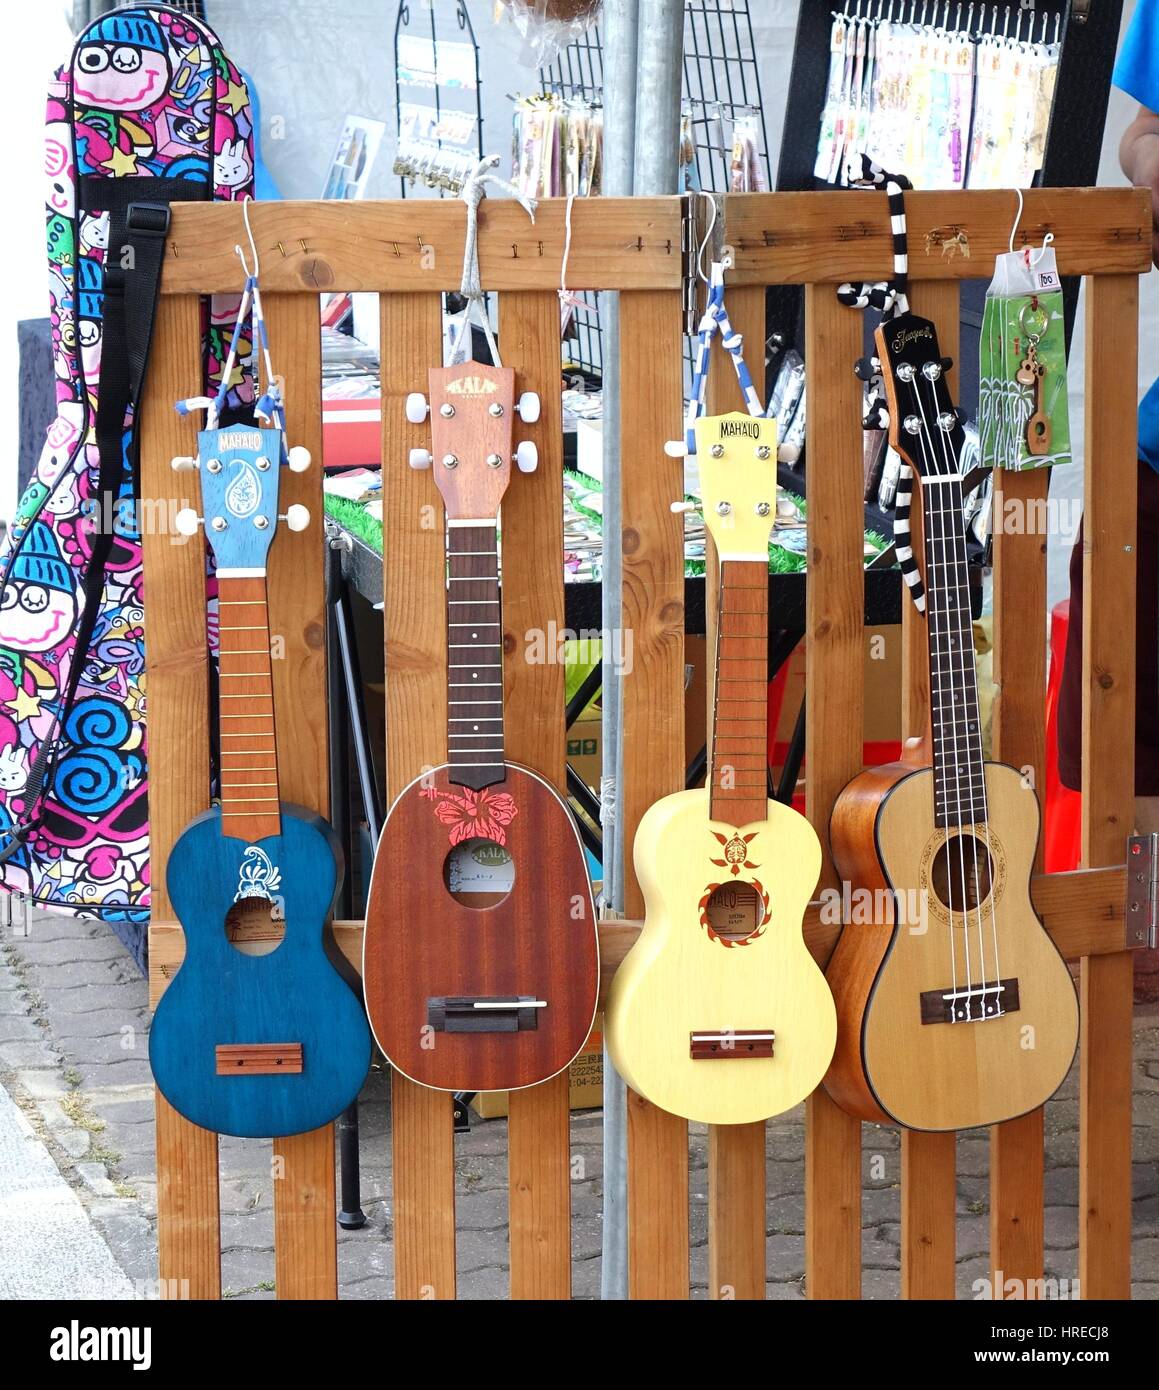 KAOHSIUNG, TAIWAN -- APRIL 23, 2016: Outdoor vendors sell musical string  instruments at the 1st Pacific Rim Ukulele Festival, a free outdoor event  Stock Photo - Alamy